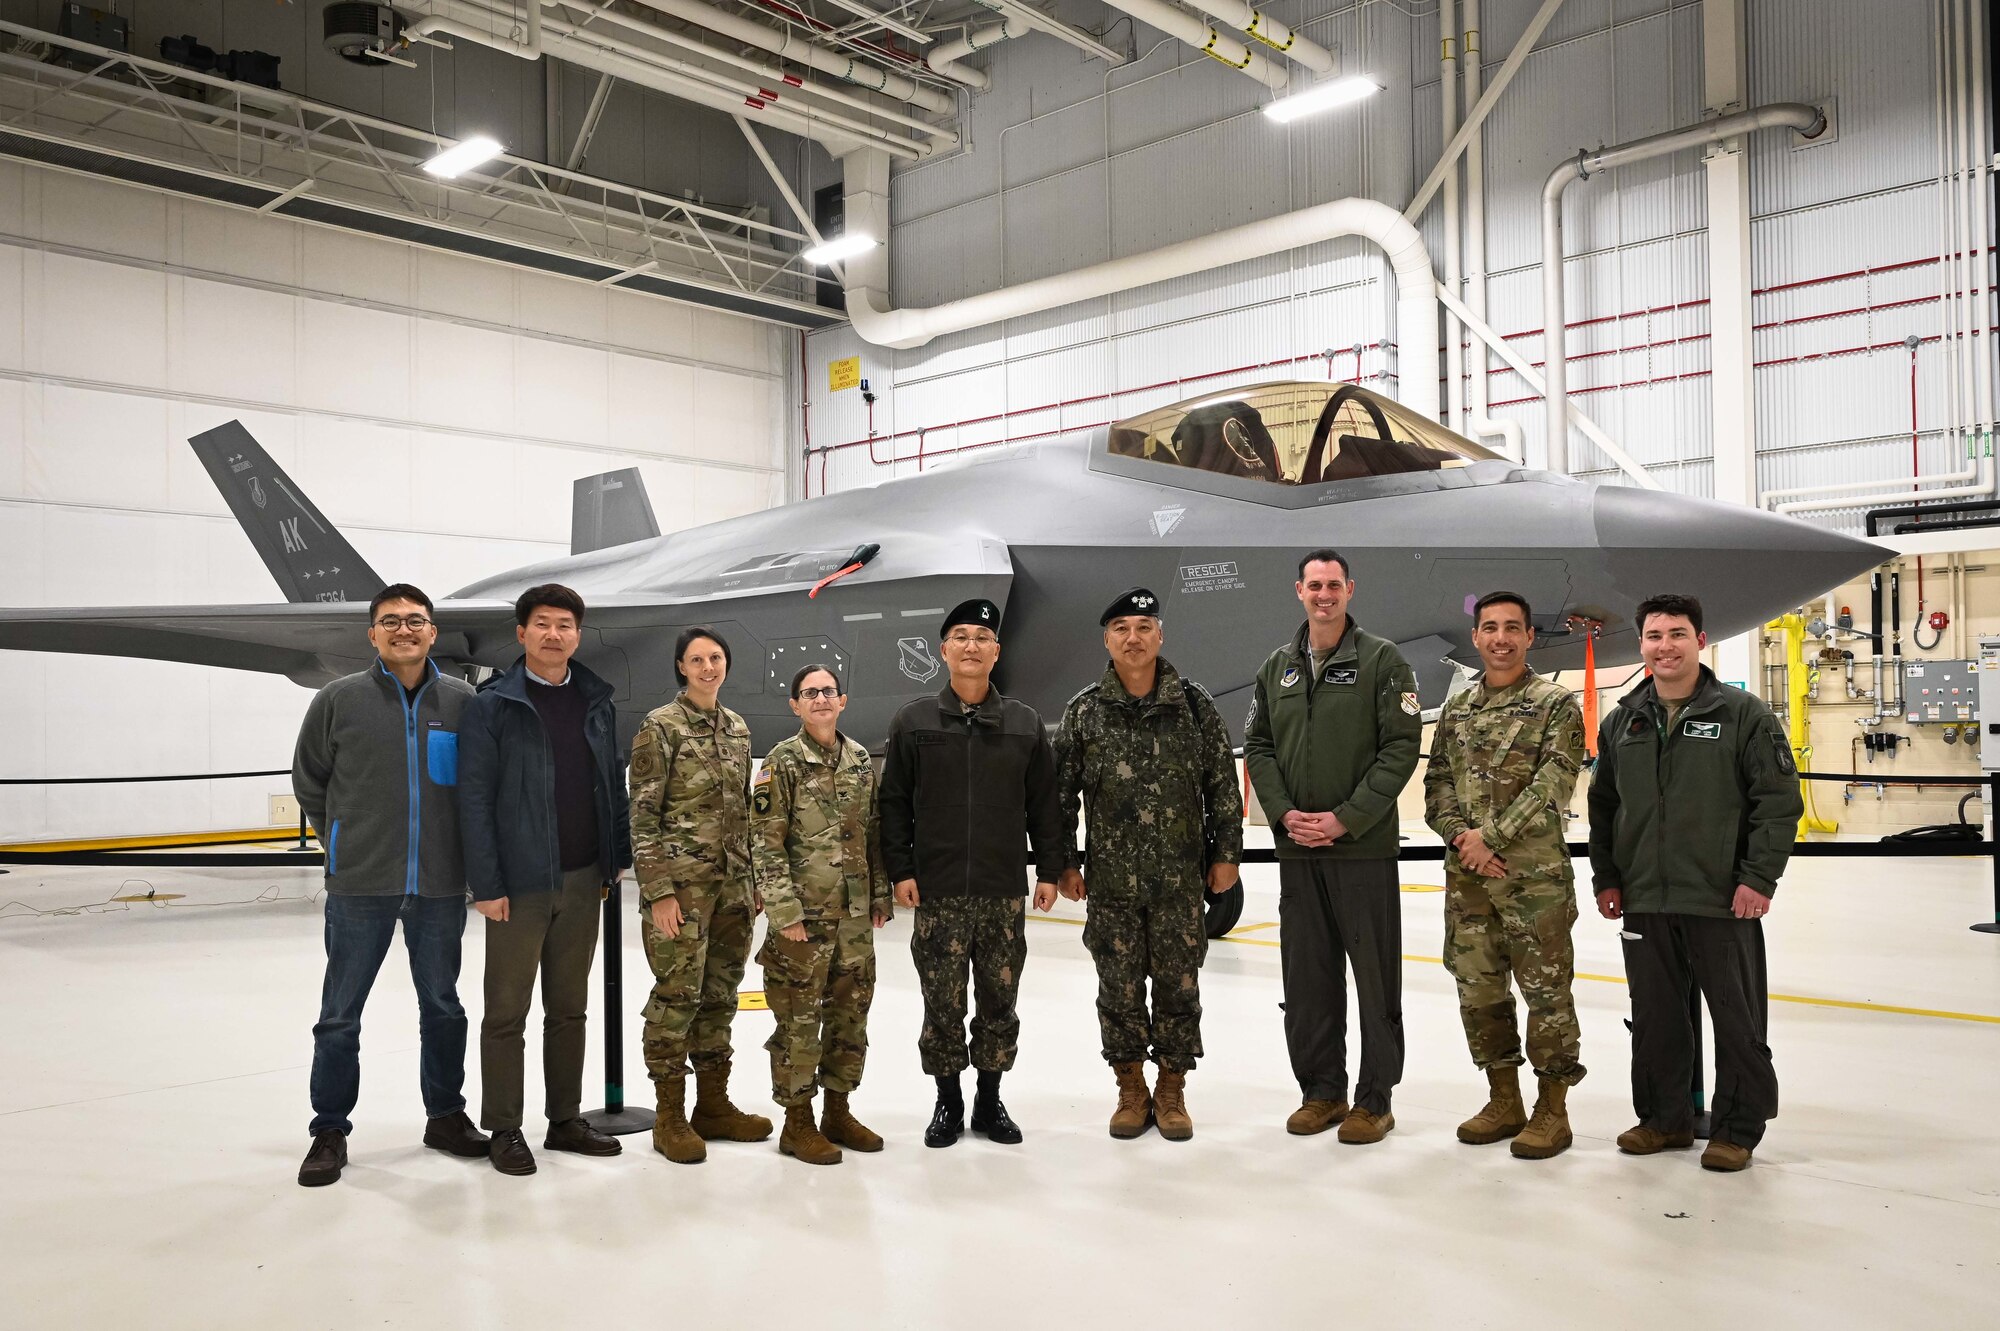 A group of people pose for a photo in front of an F-35